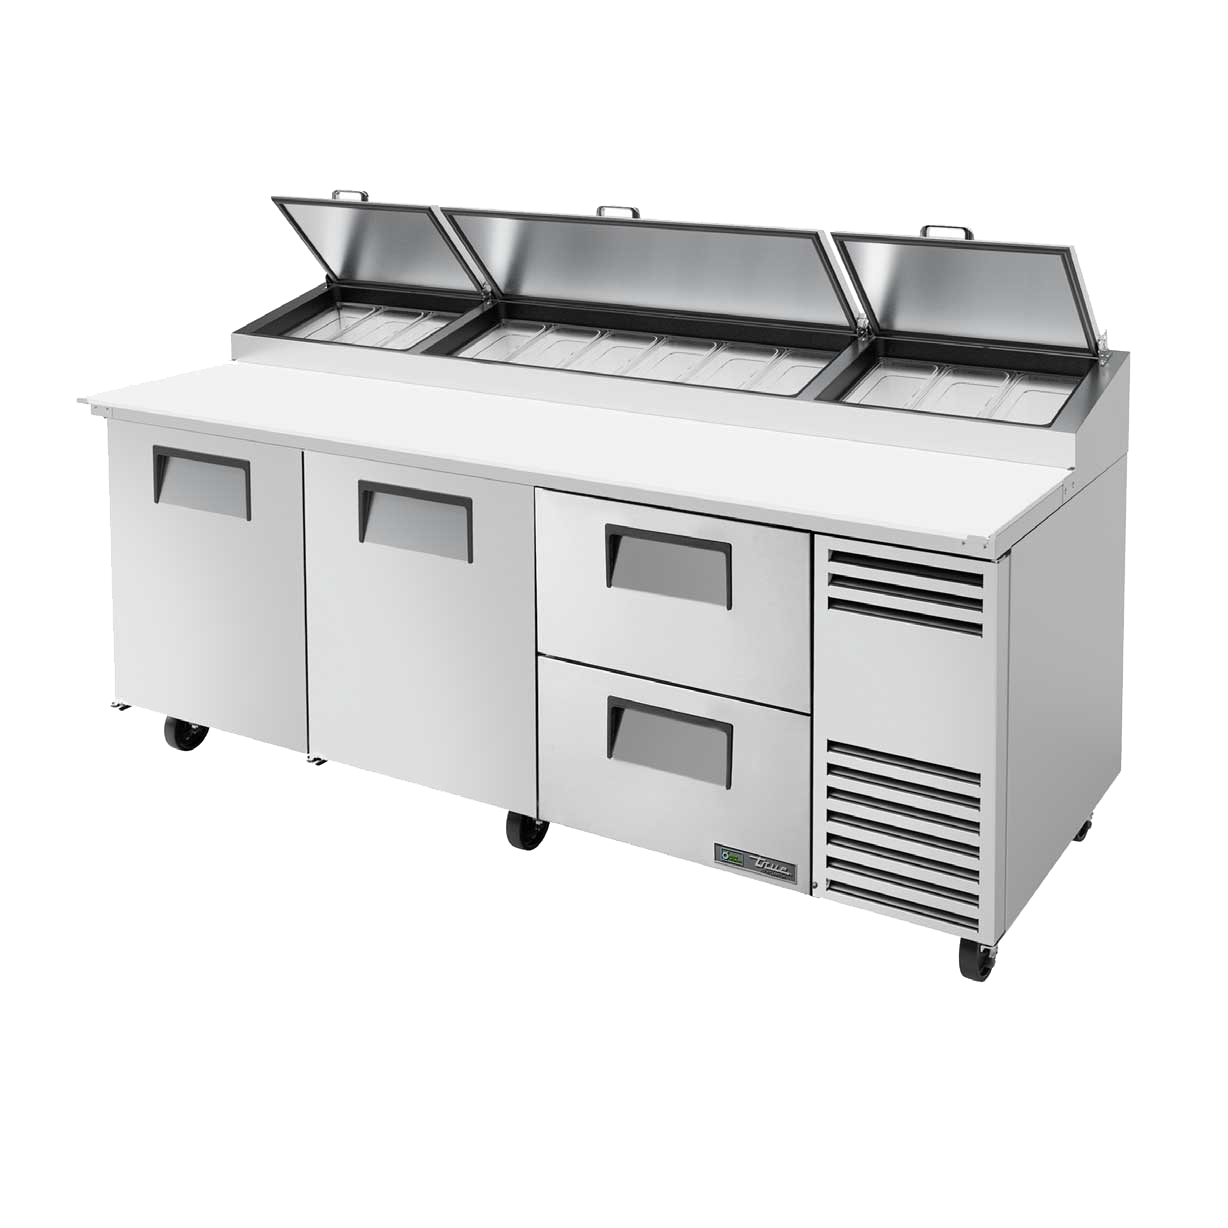 superior-equipment-supply - True Food Service Equipment - True Stainless Steel Three Section Two Drawers 93"W Pizza Prep Table